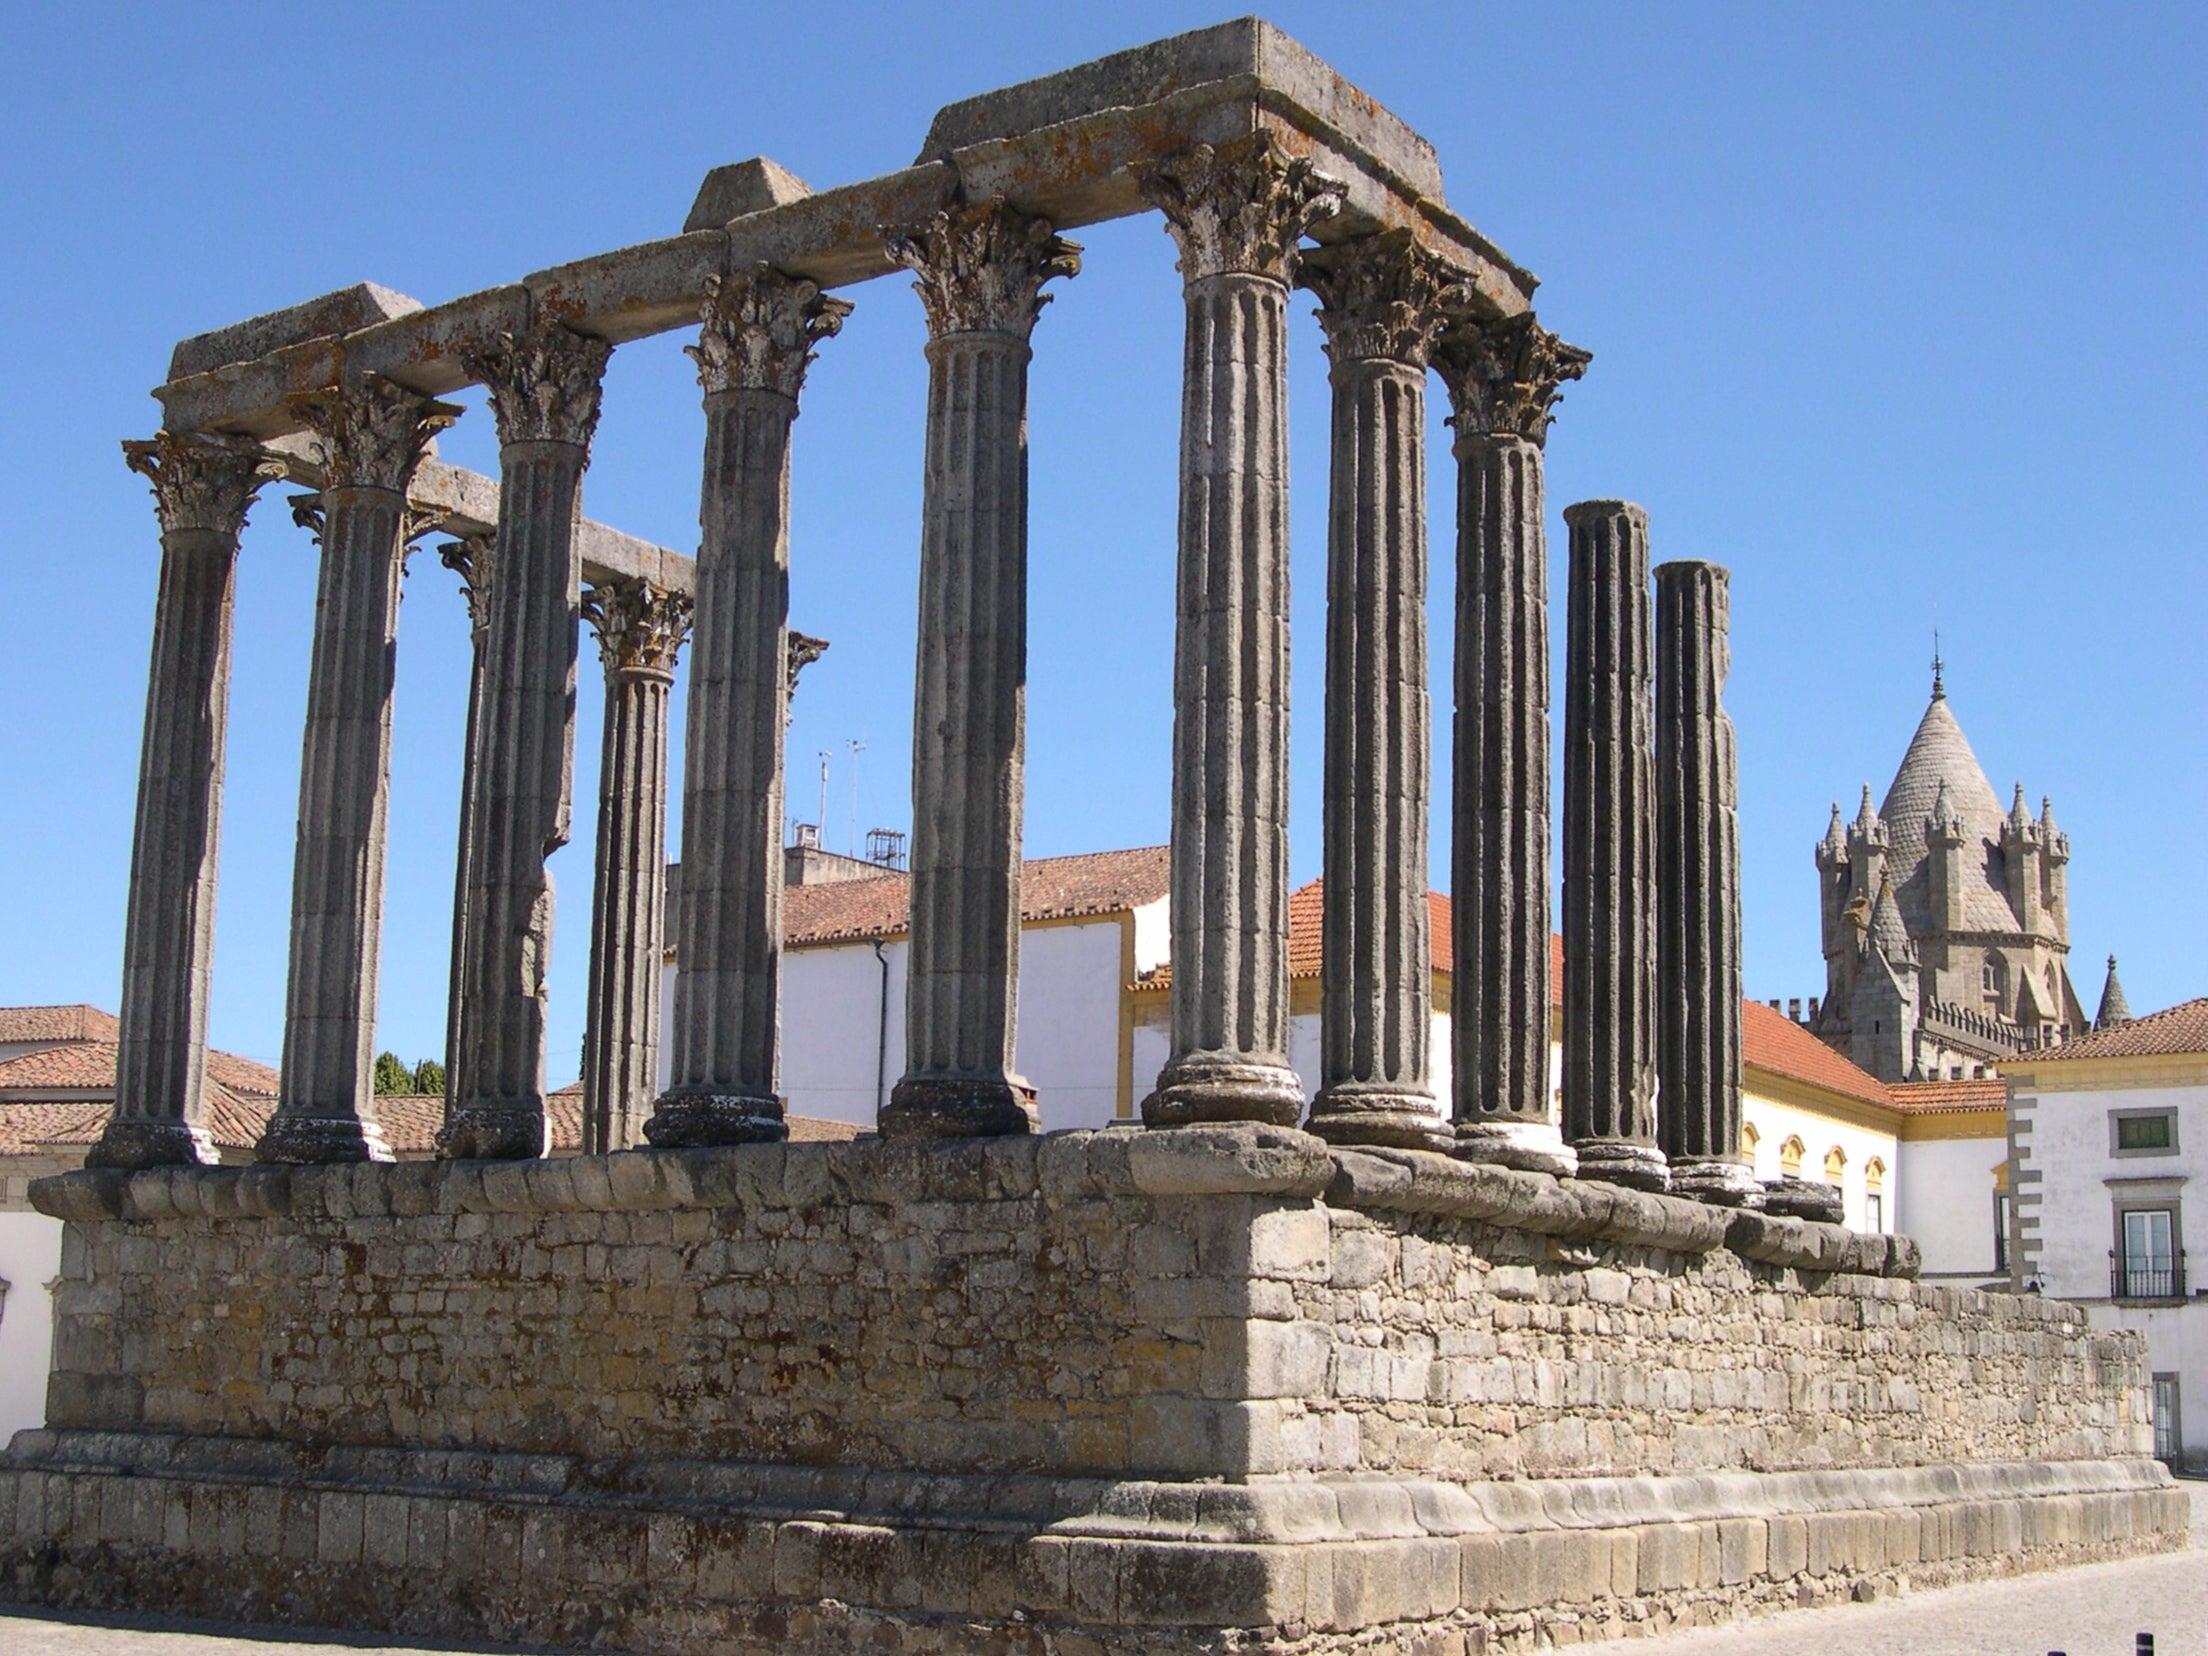 The Roman Temple of Diana is found in Evora